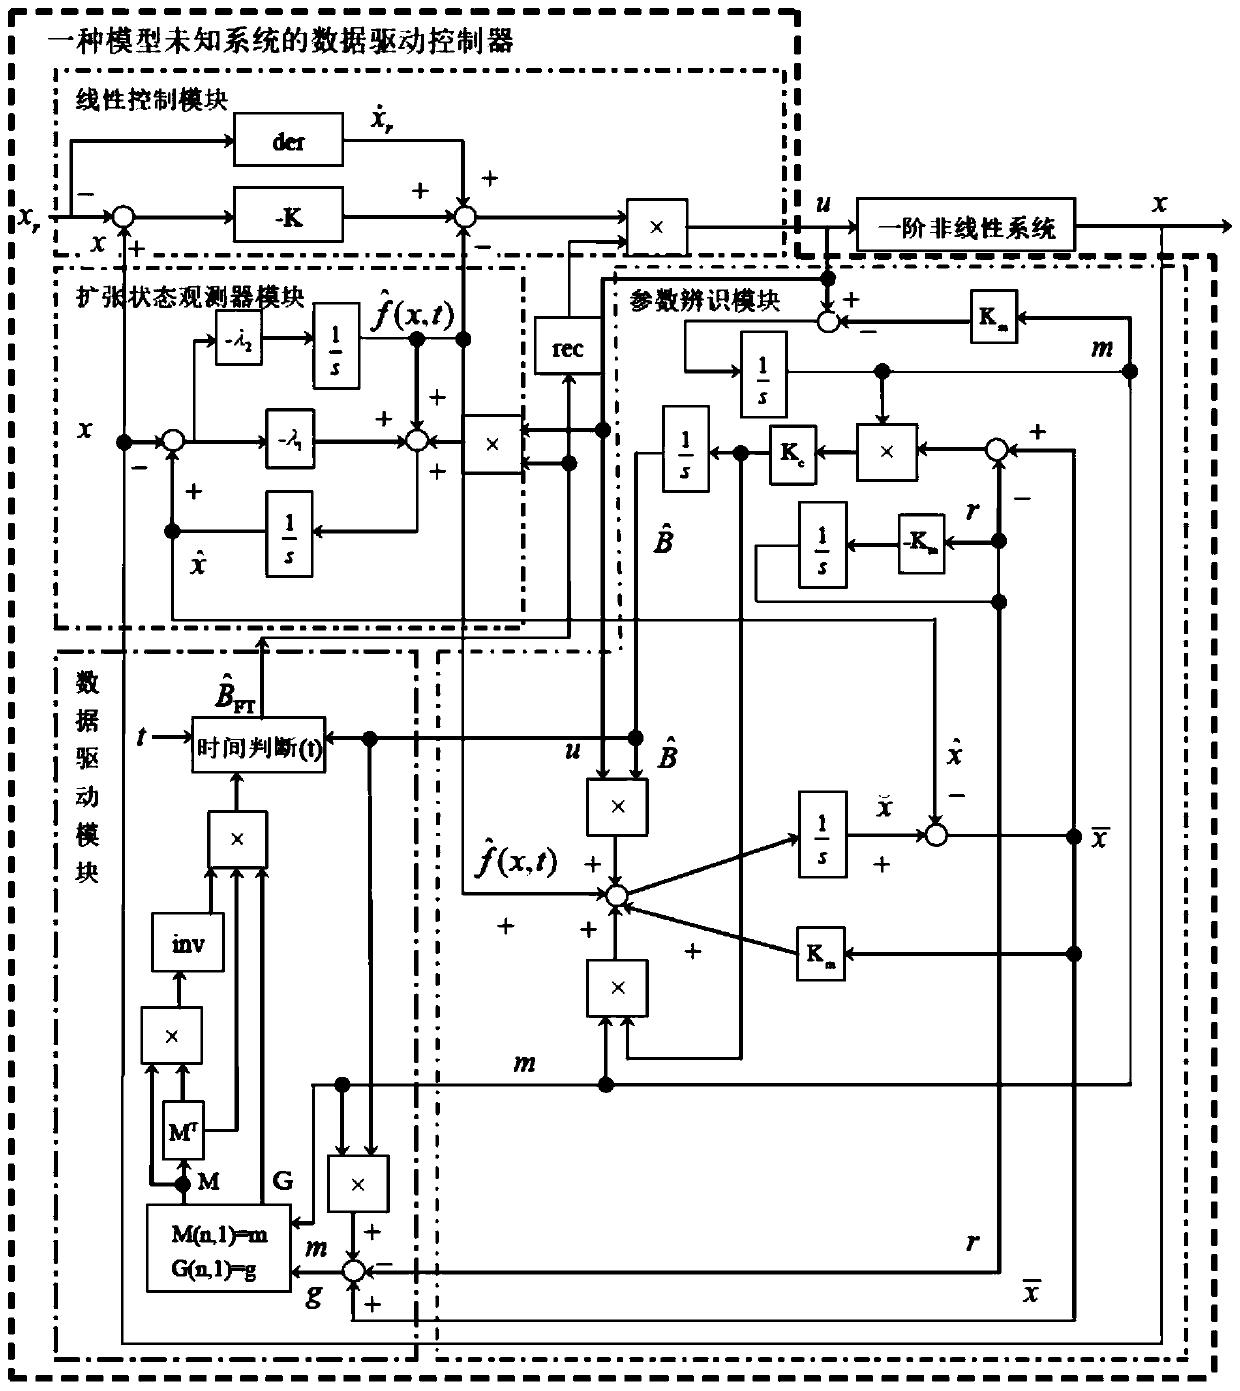 Data driving controller of model unknown system